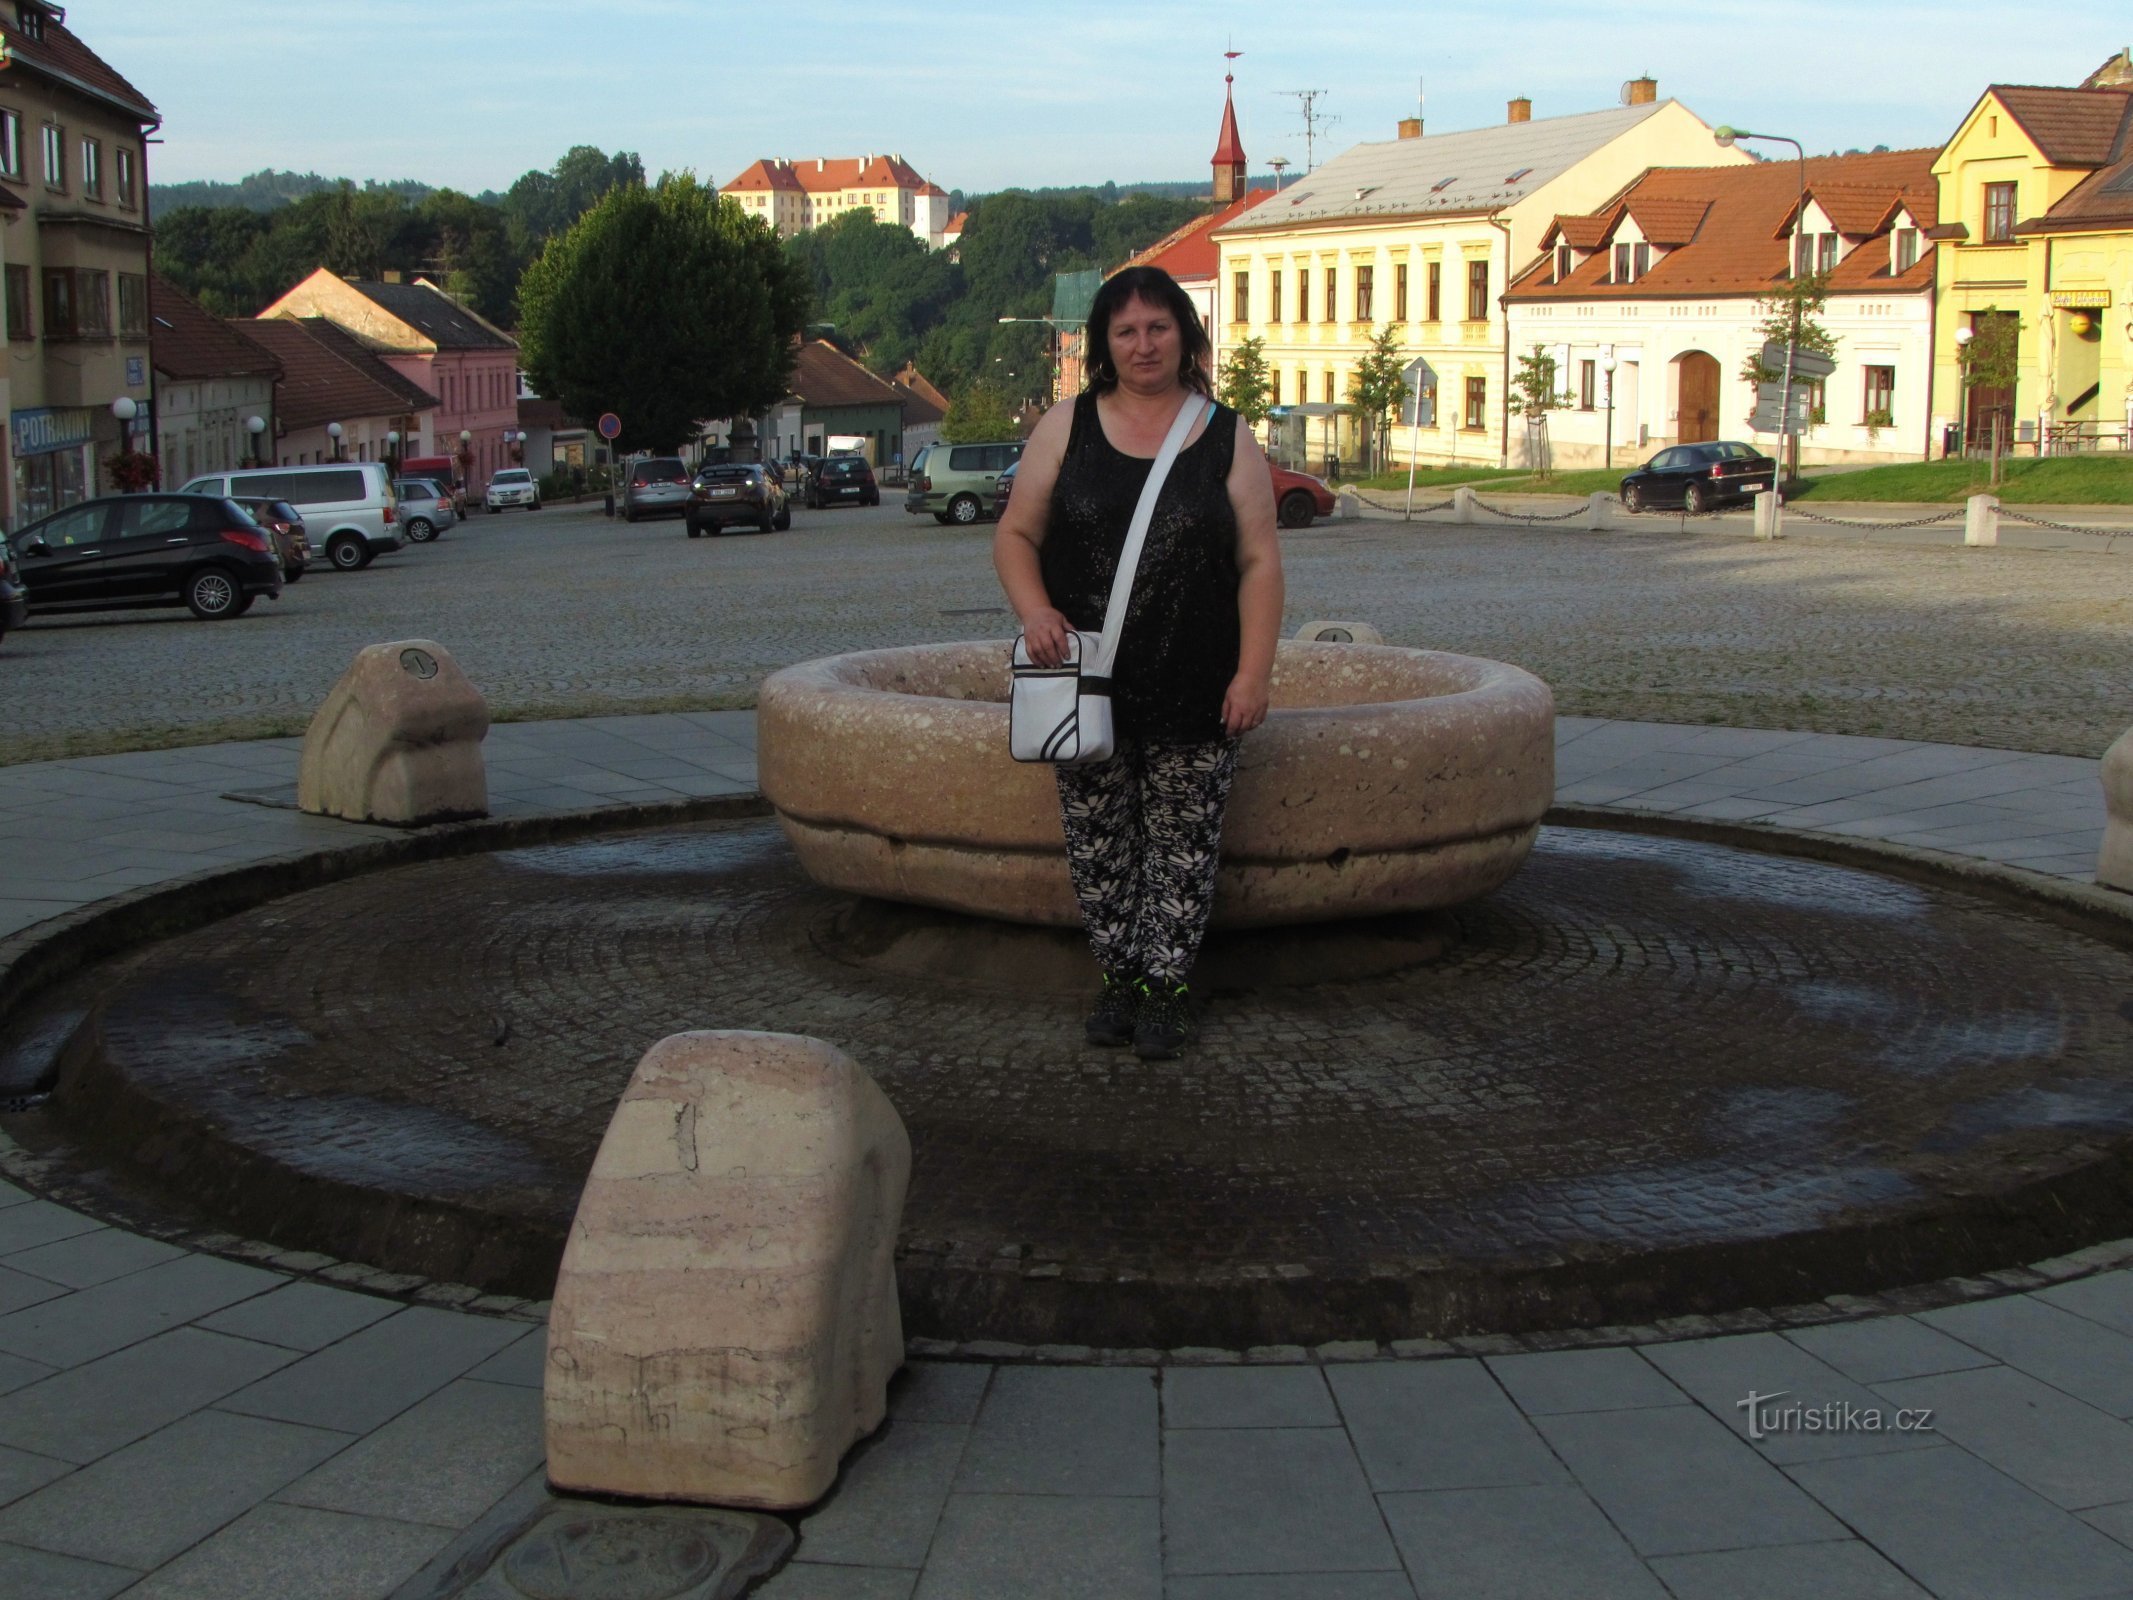 An unconventional fountain on King George Square in Kunštát